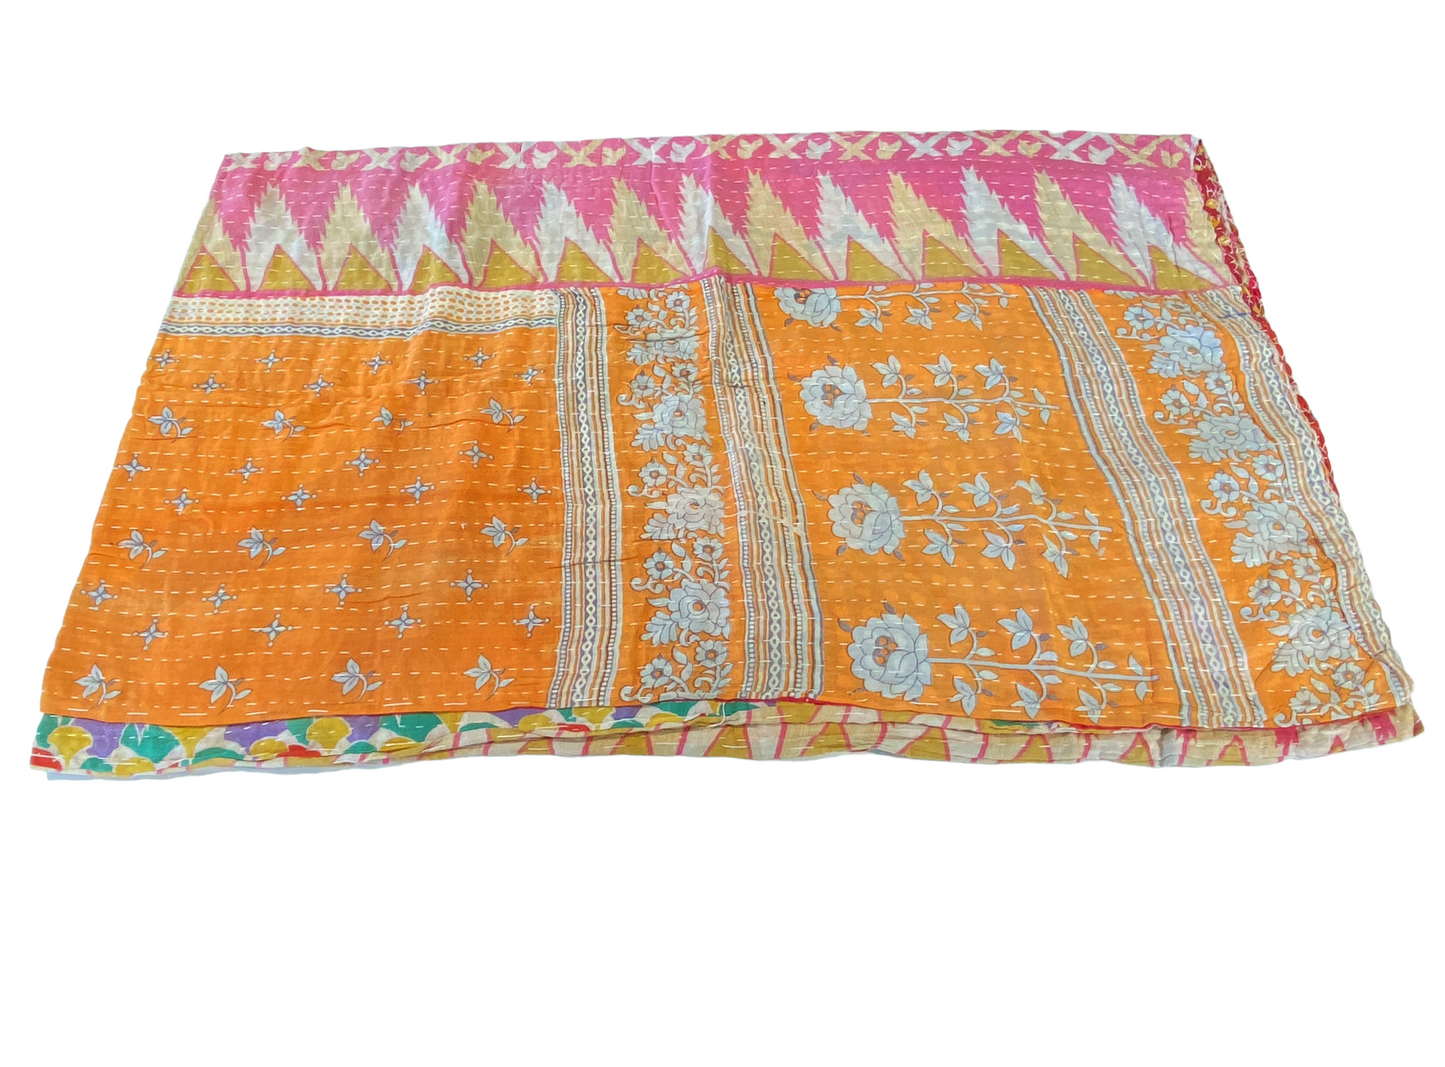 #5156 Vintage Indian Cotton Throw Kantha Quilt 51" w by 88" H